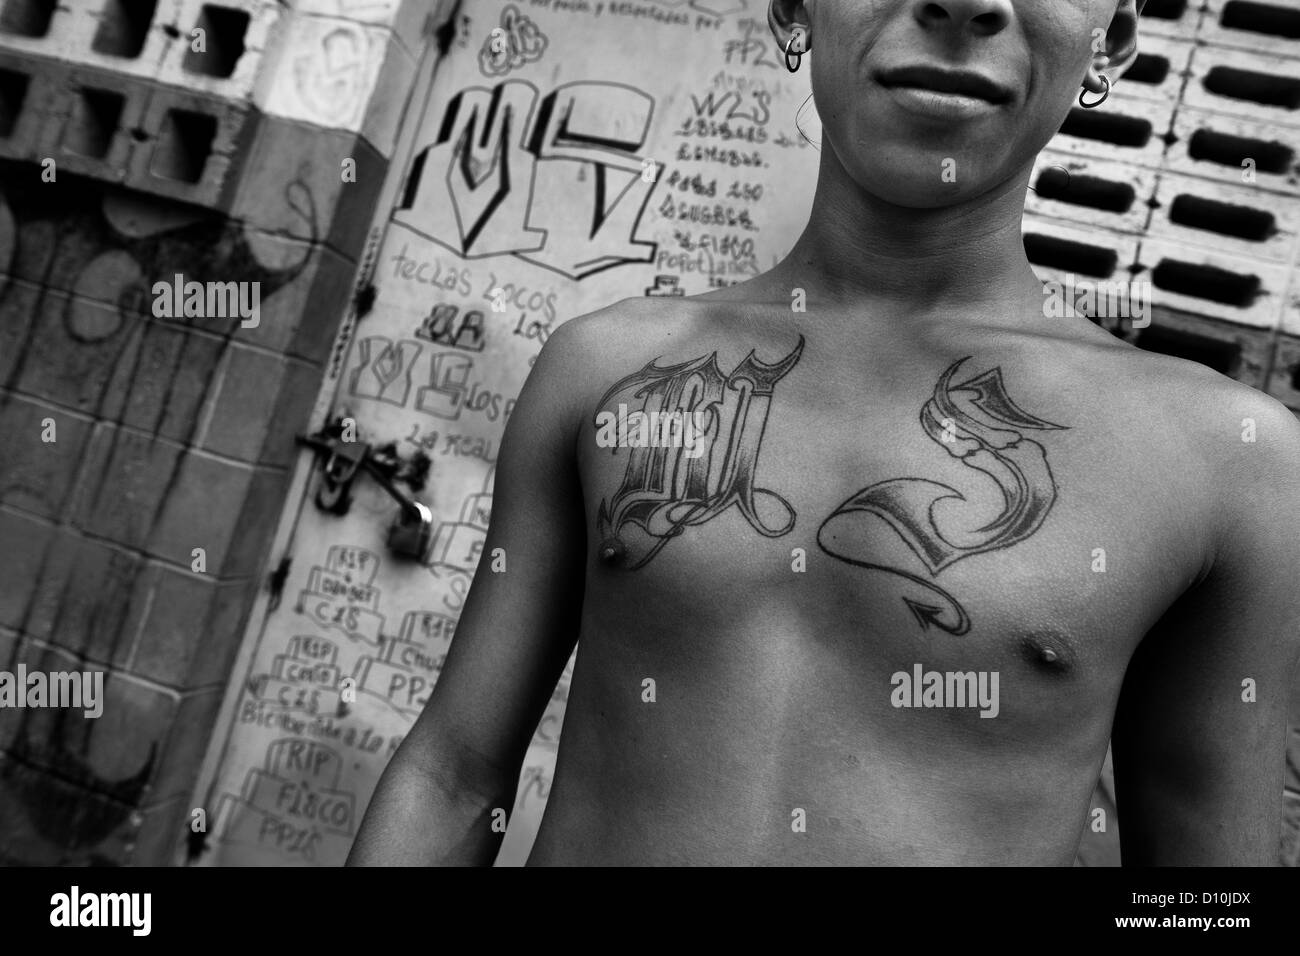 A member of the Mara Salvatrucha gang (MS-13) shows off his gang tattoos in the prison of Tonacatepeque, El Salvador. Stock Photo